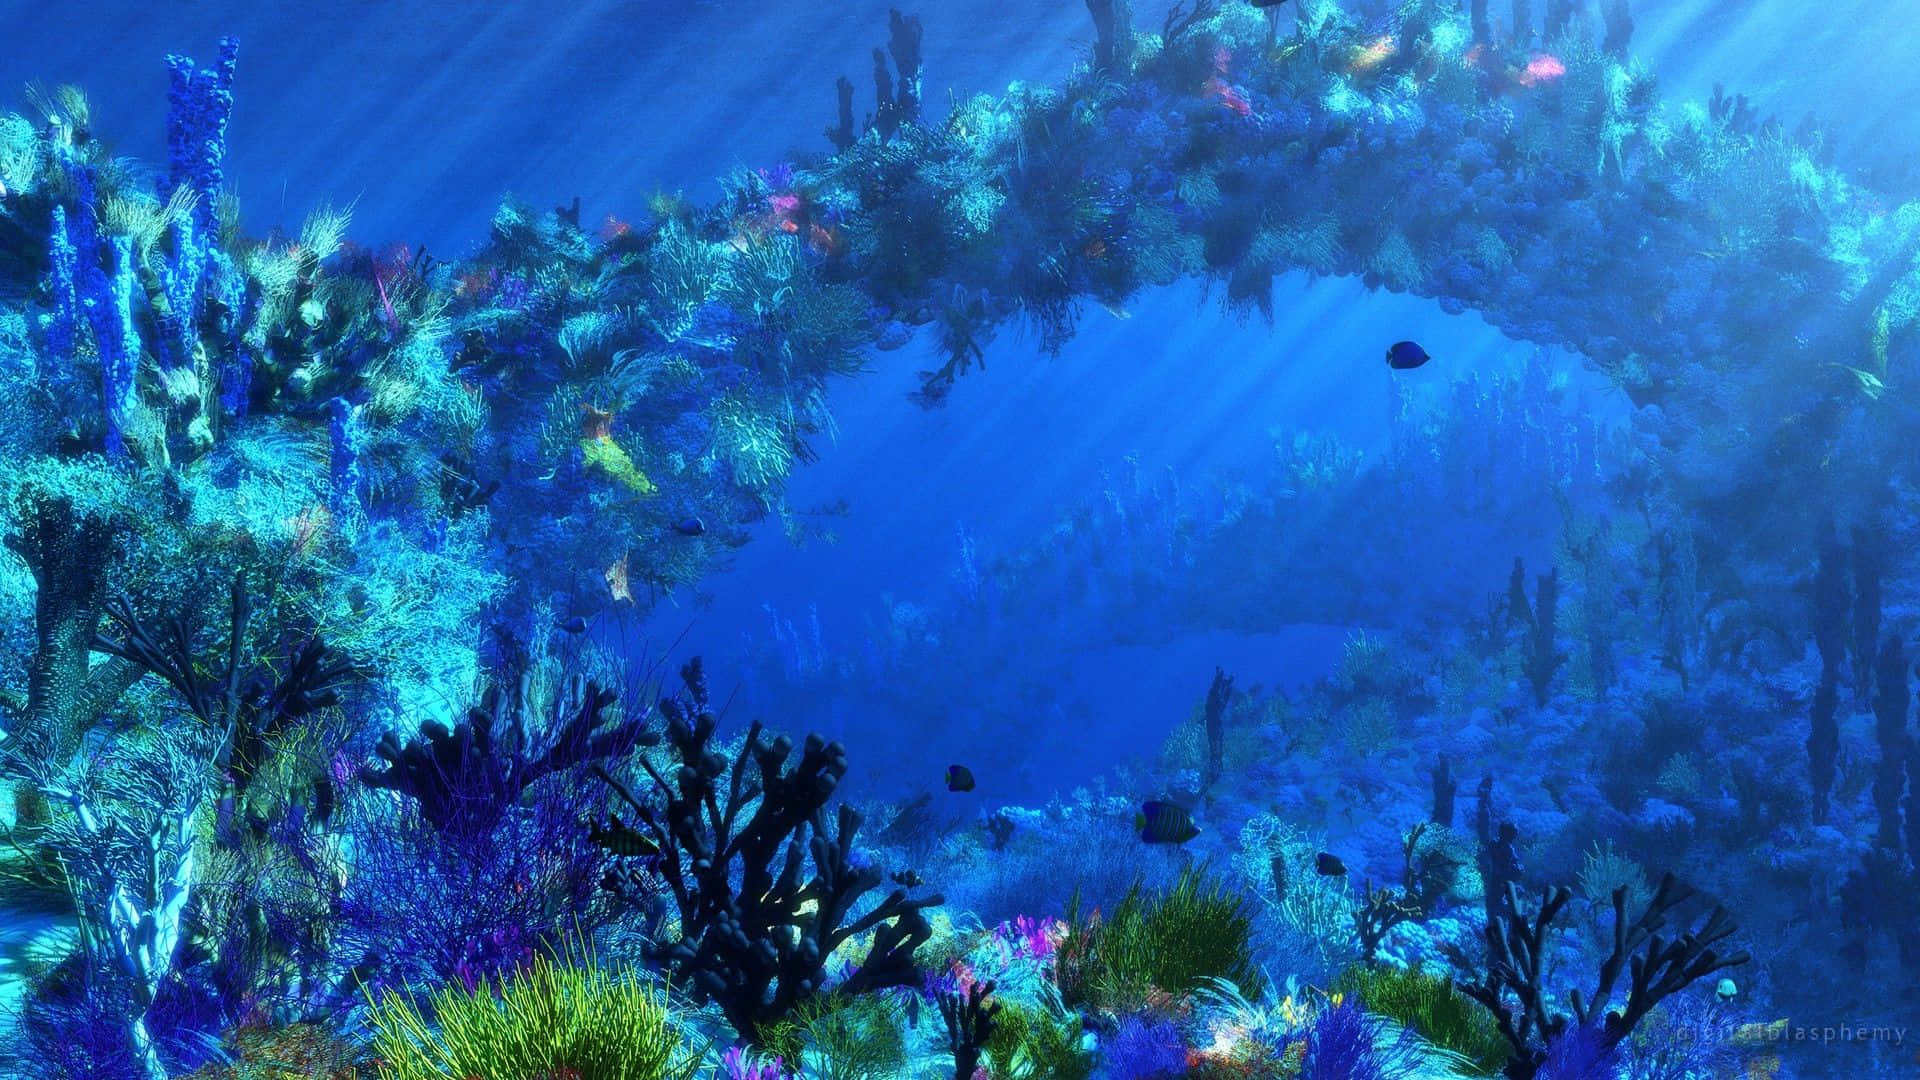 Explore the magical underwater world of the ocean